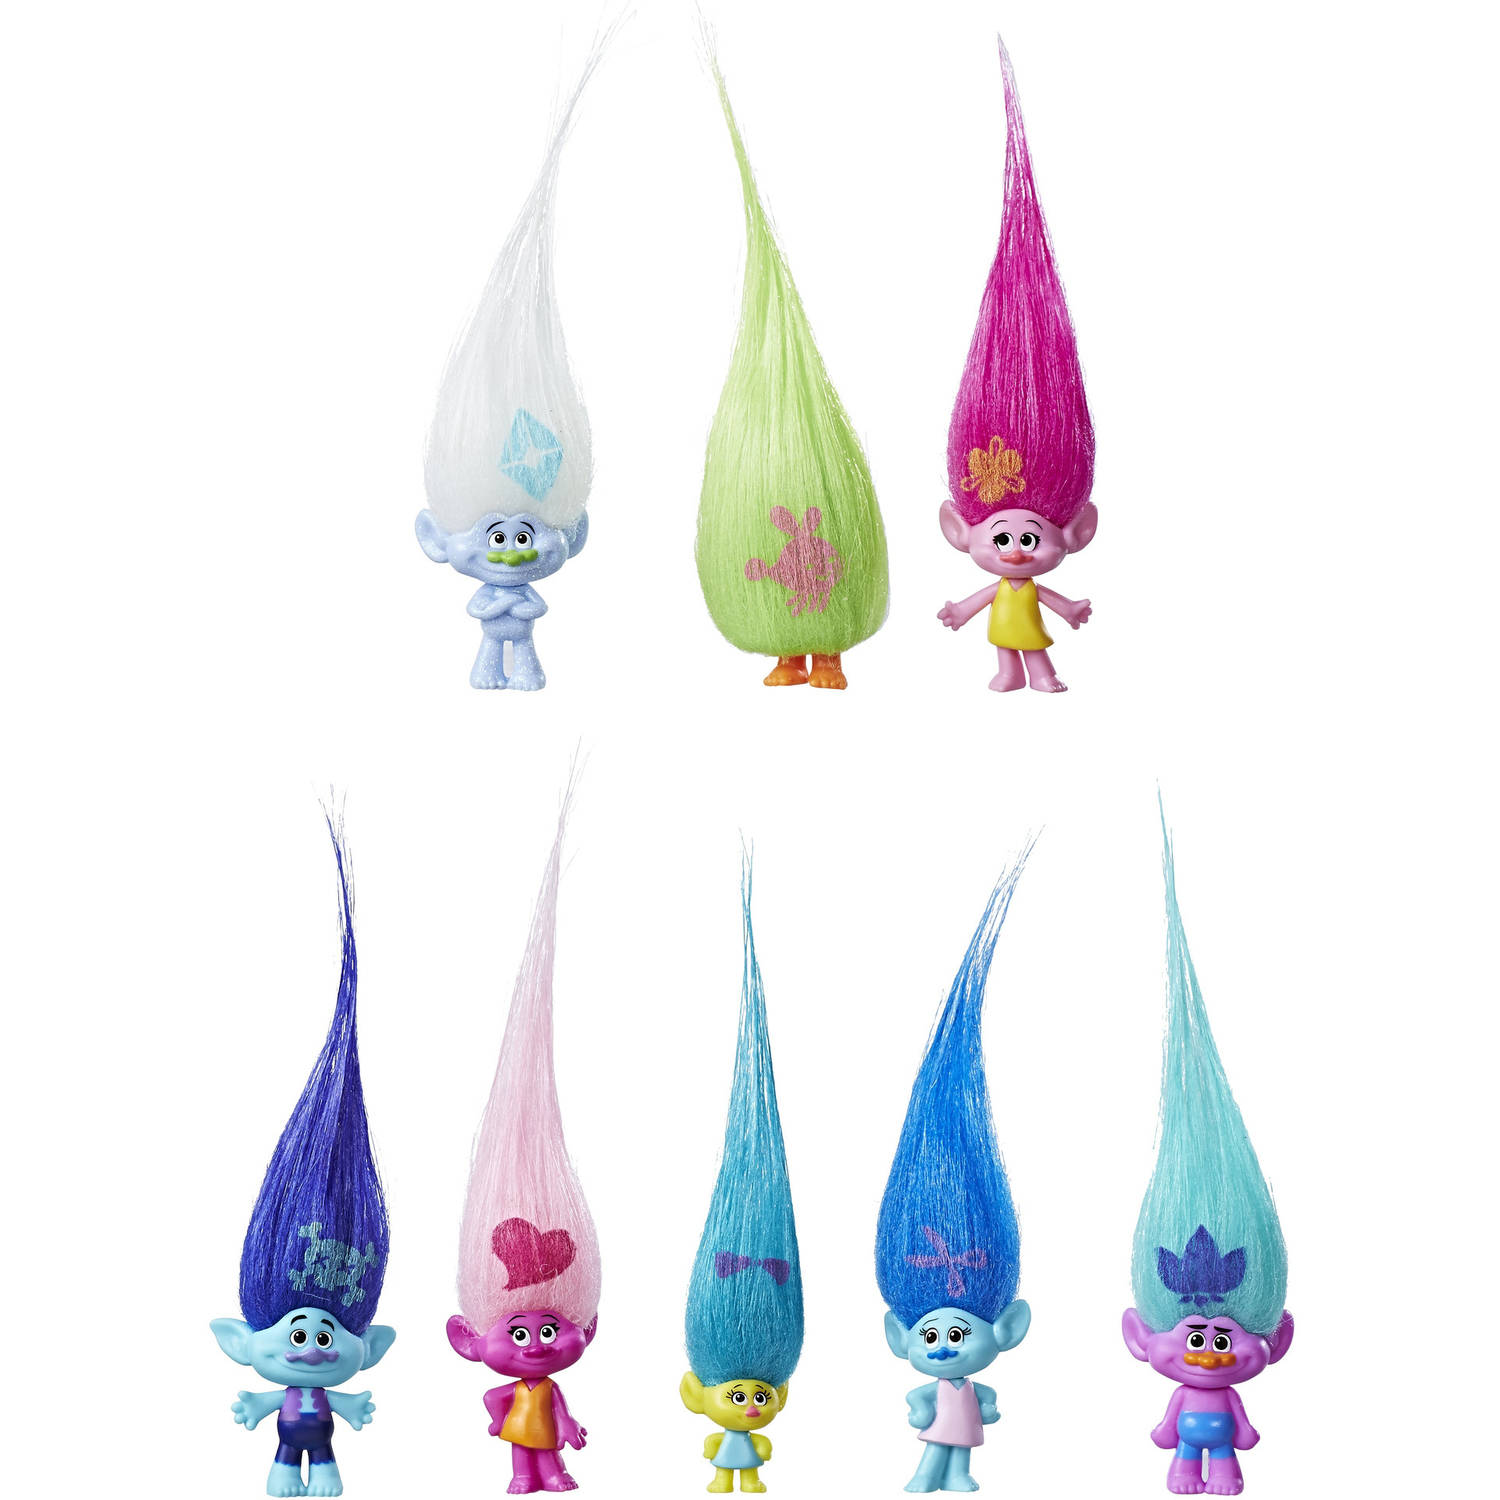 DreamWorks Trolls Wild Hair Collection Pack (8 Dolls) Only $5.50!